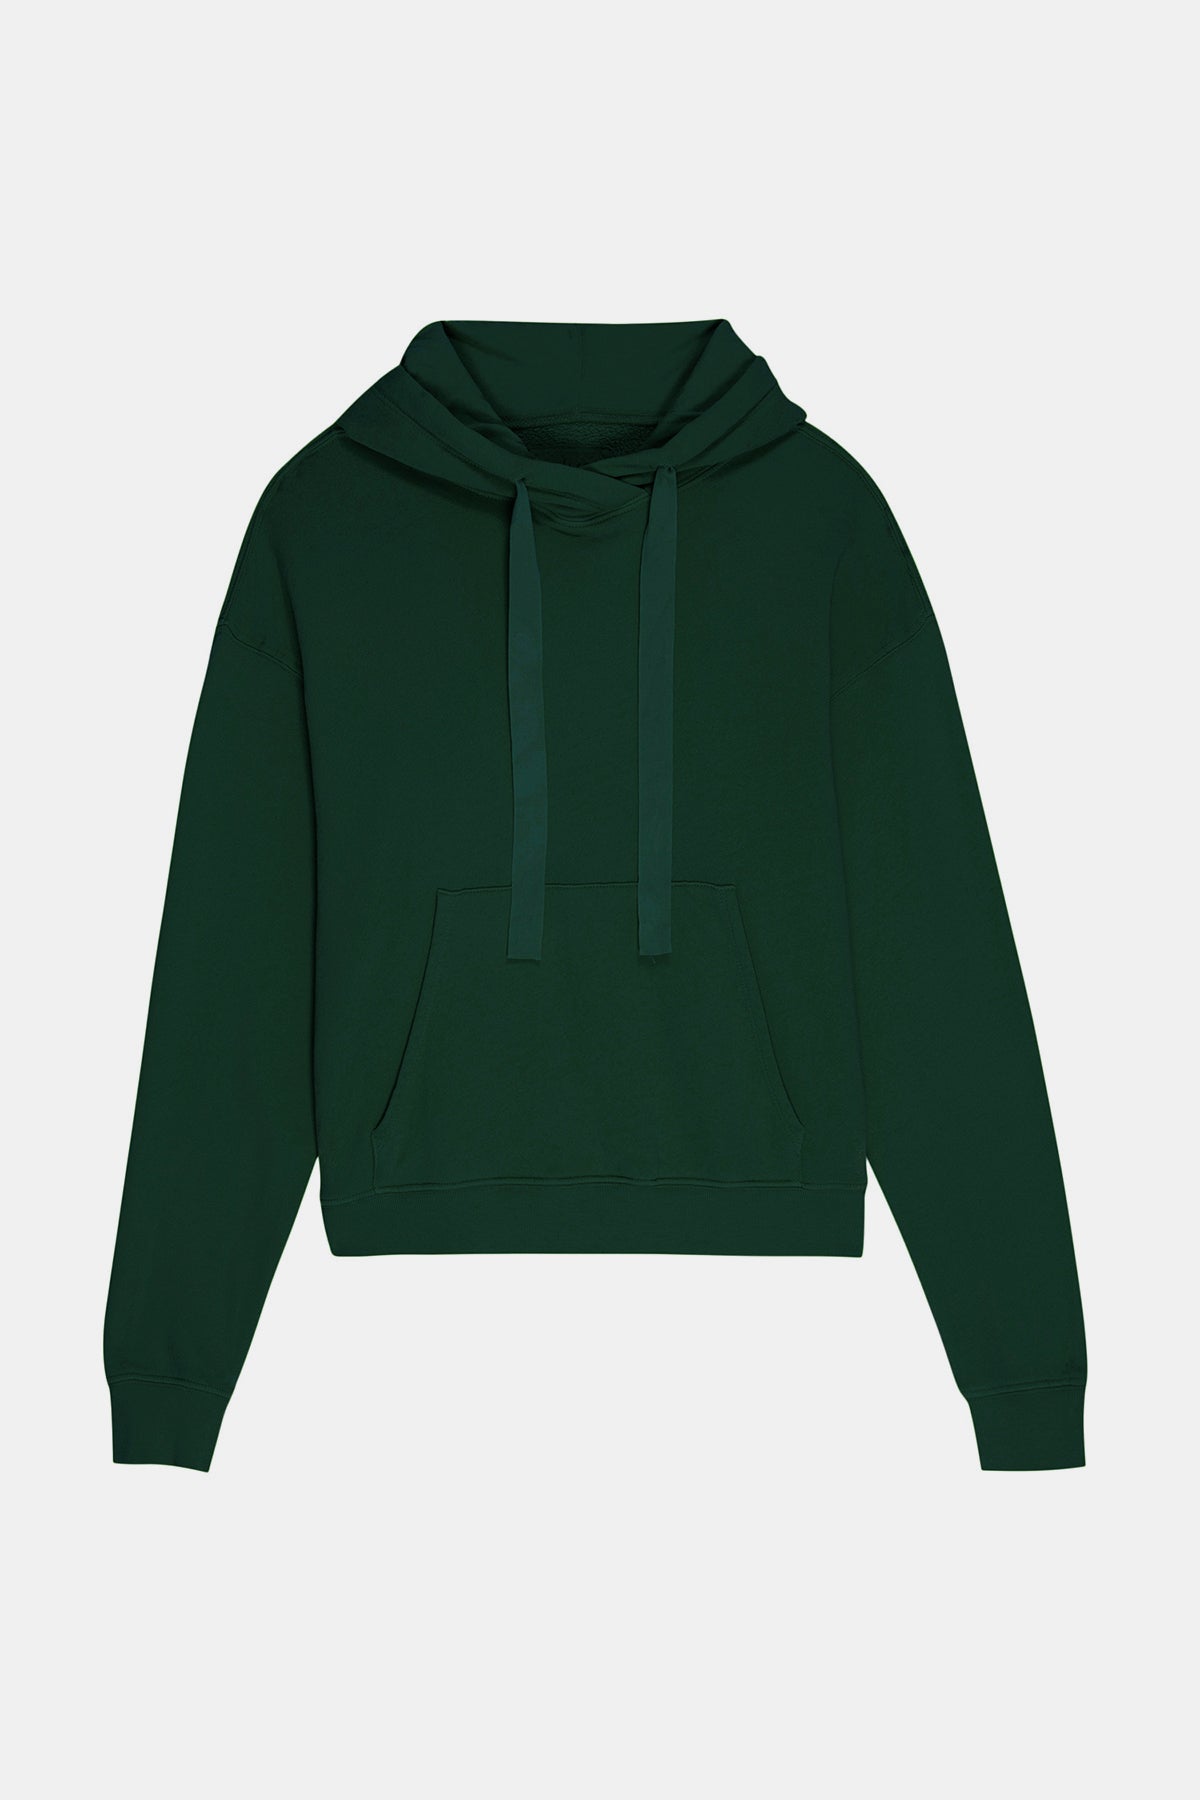 Ojai Hoodie in forest green flat-25483563172033